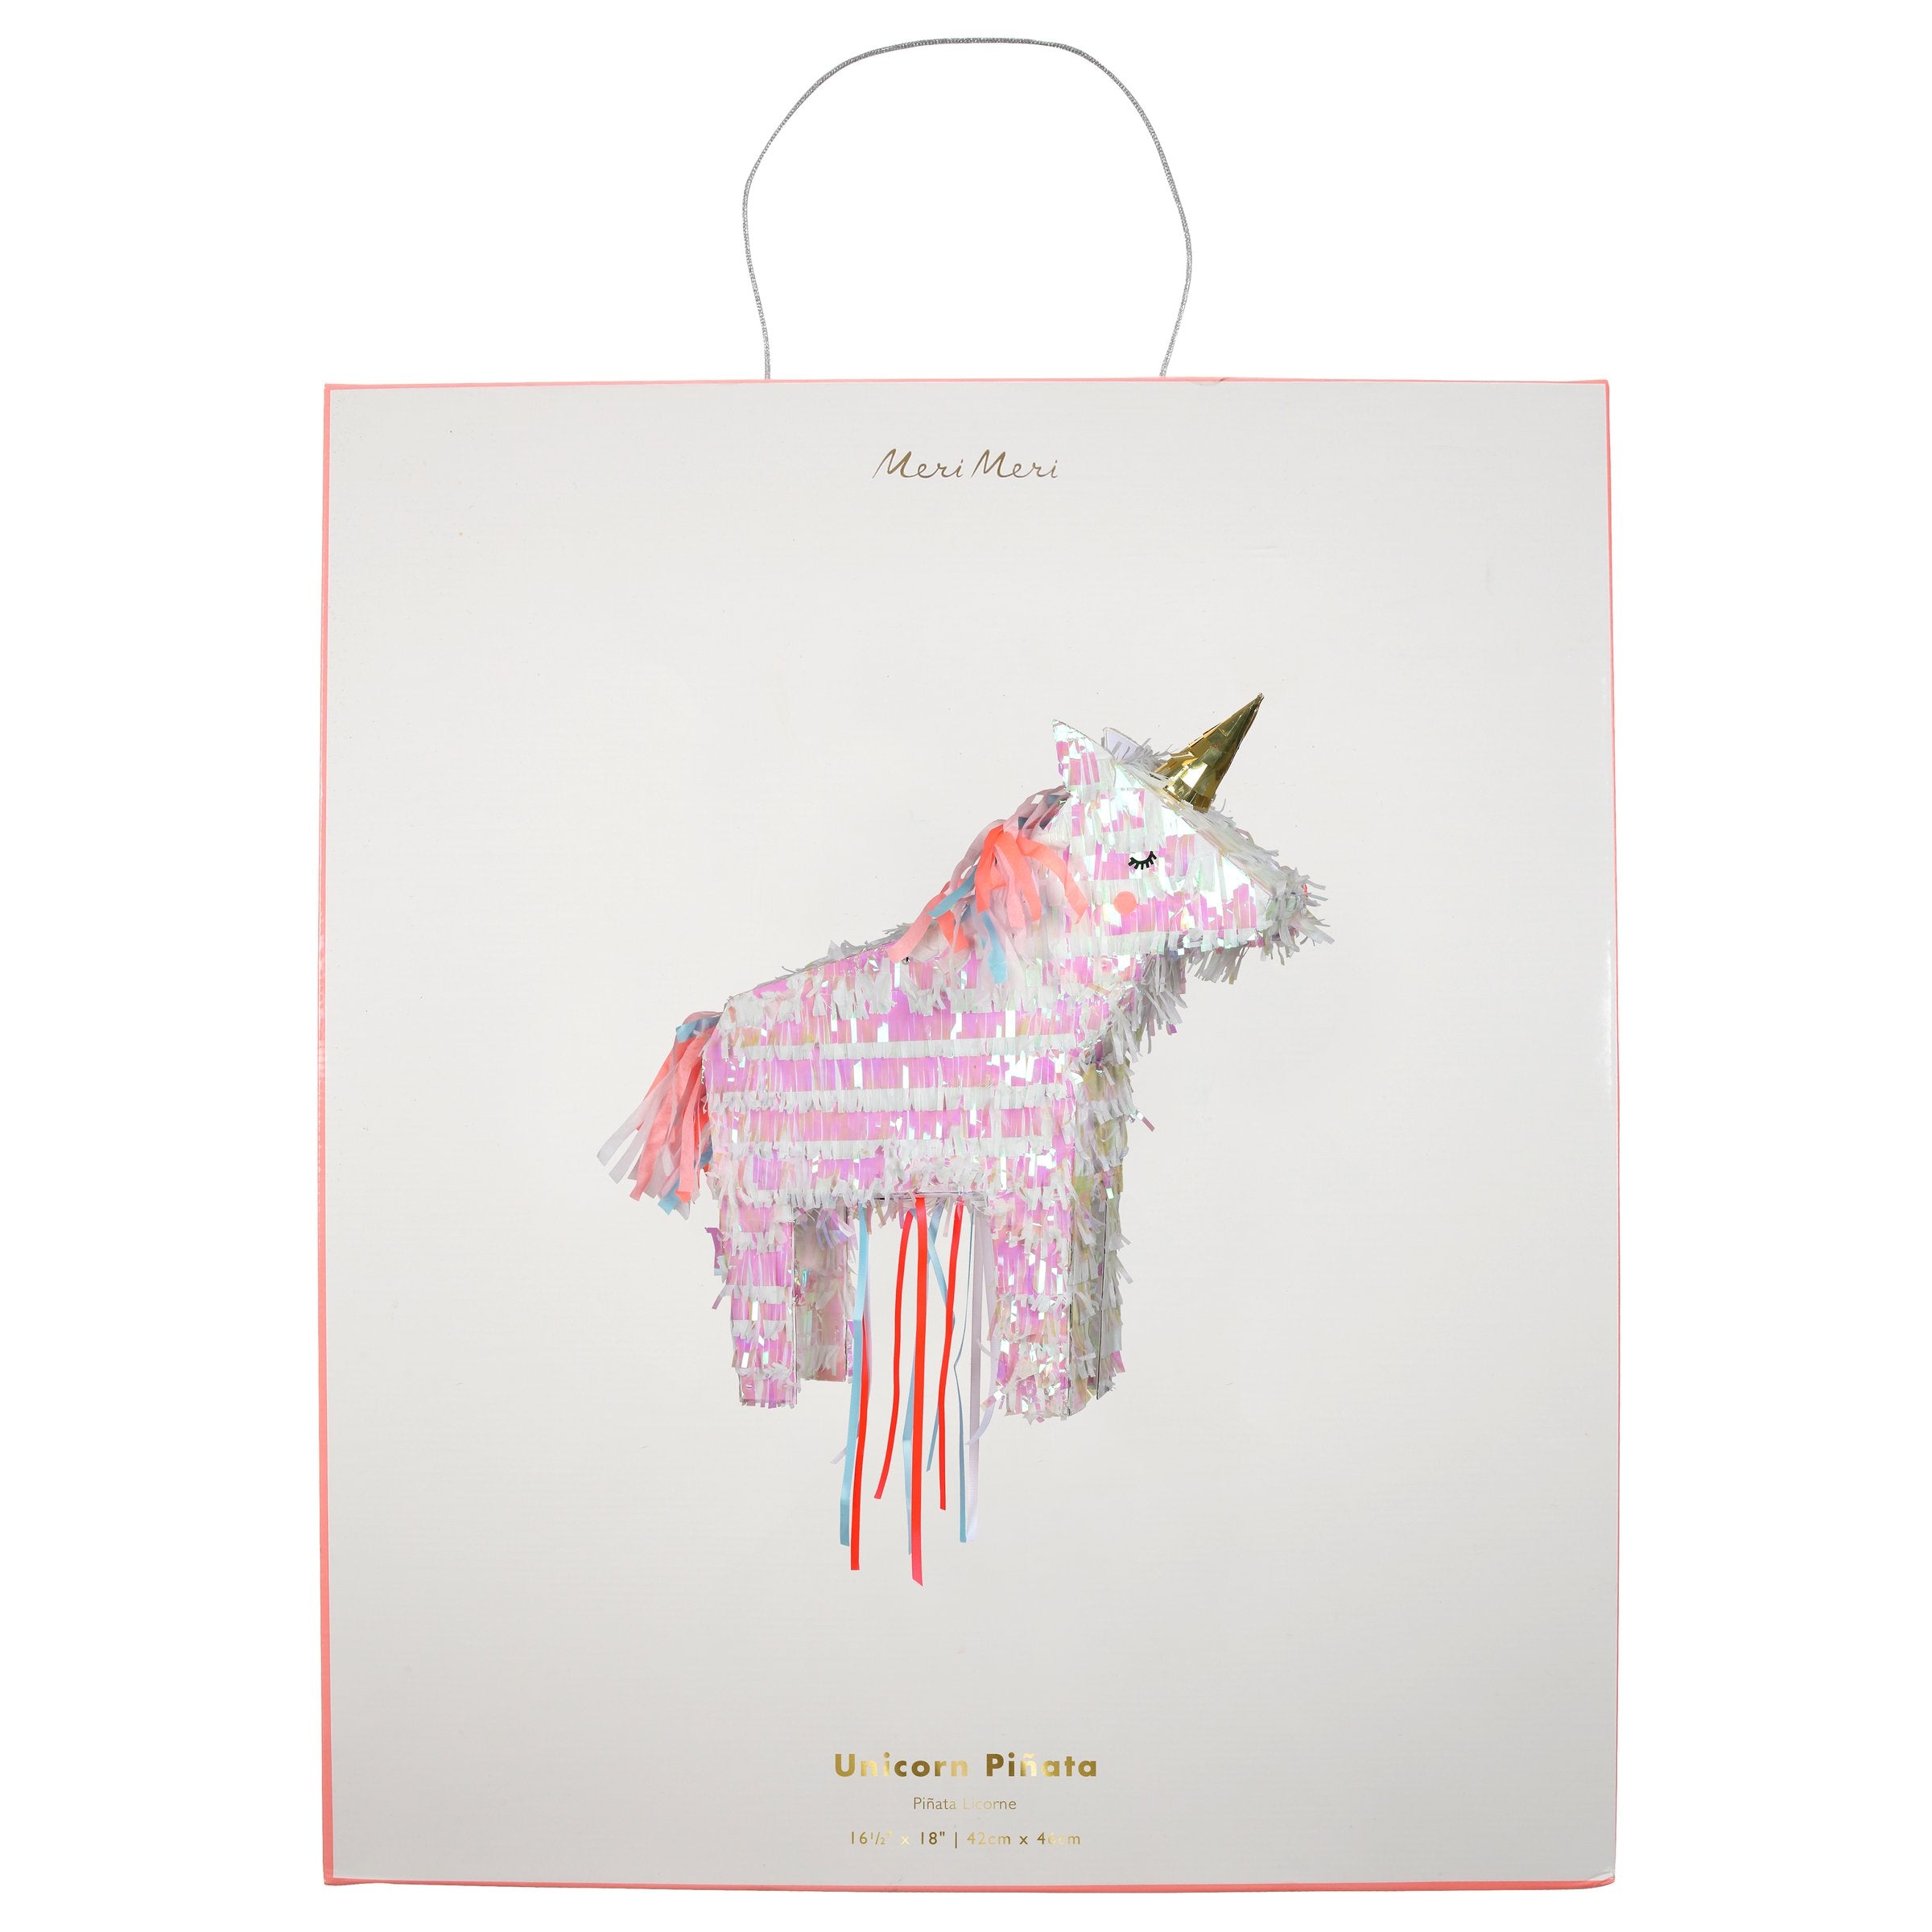 This unicorn pinata is crafted with iridescent and gold foil detail, and lots of bright ribbons.